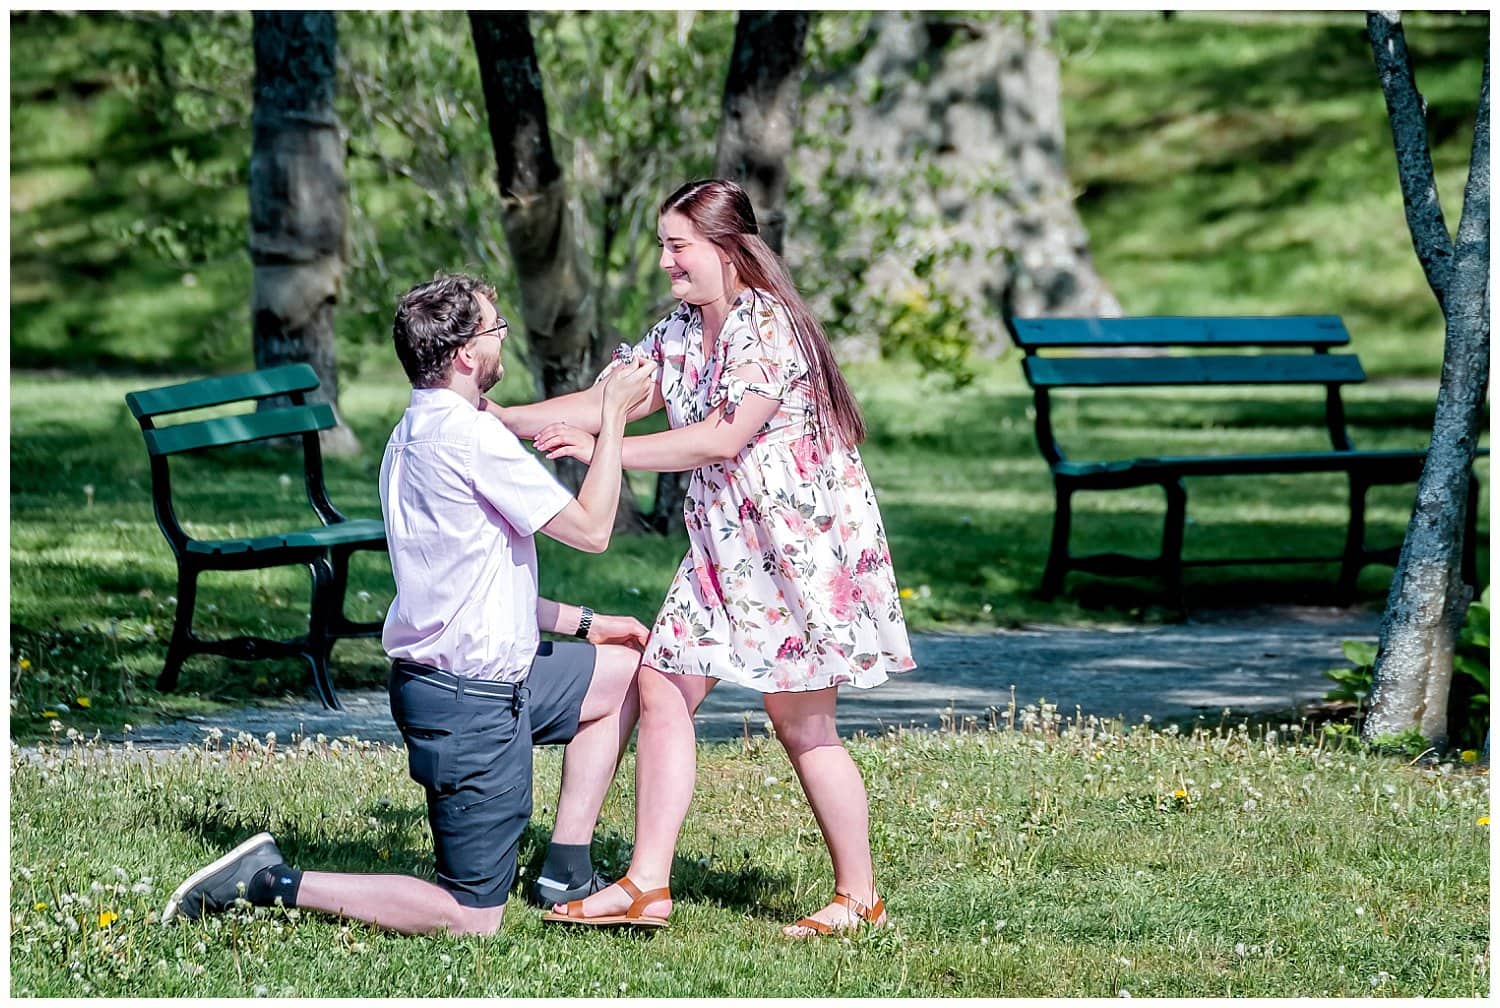 Boyfriend down on one knee asking his girlfriend to marry him.